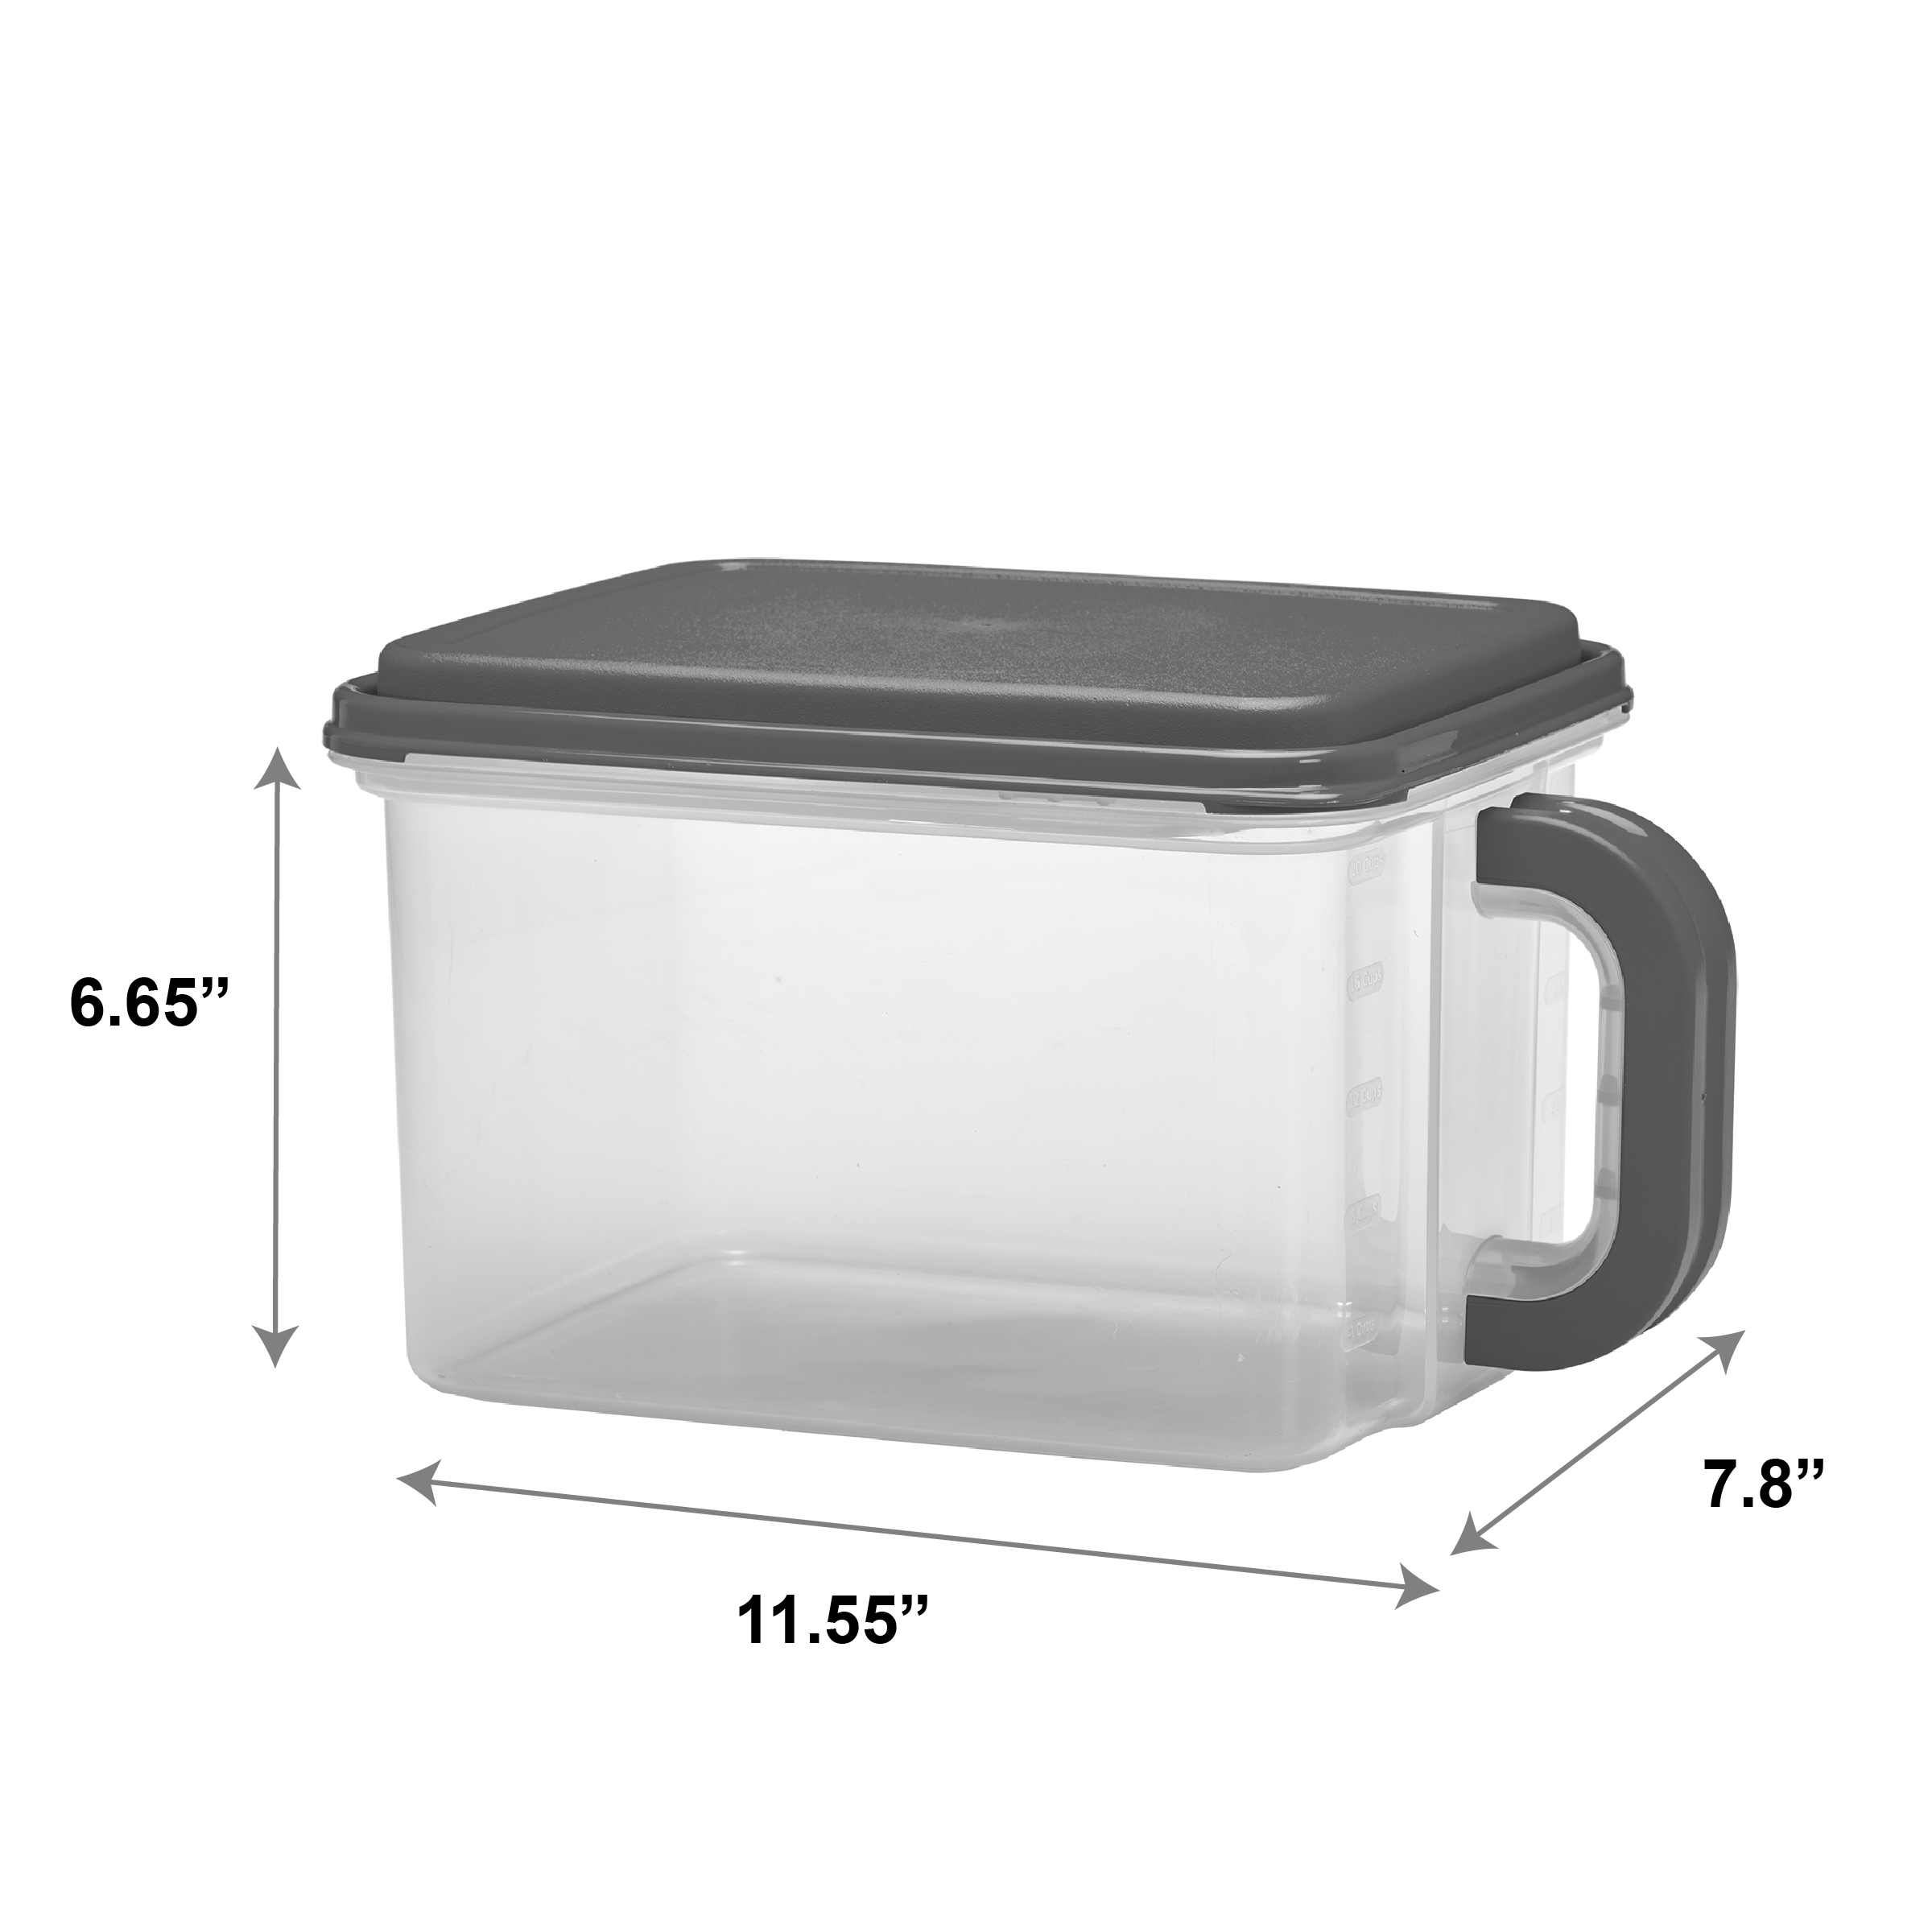 Mainstays Medium Canister with Handle, 21 Cups - Plastic, Gray Lid and Handle - image 2 of 5